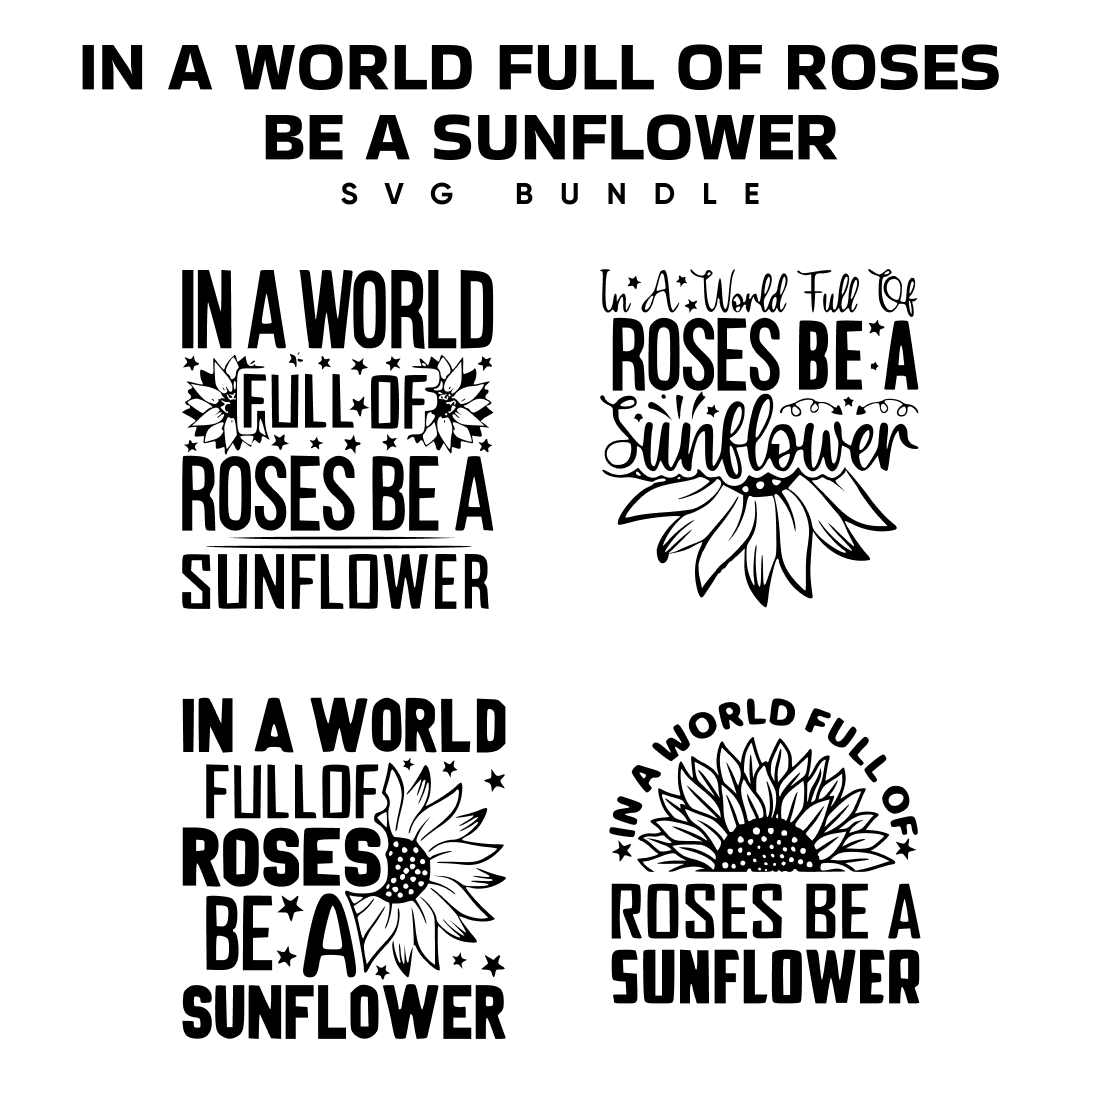 In a World Full of Roses Be a Sunflower SVG.